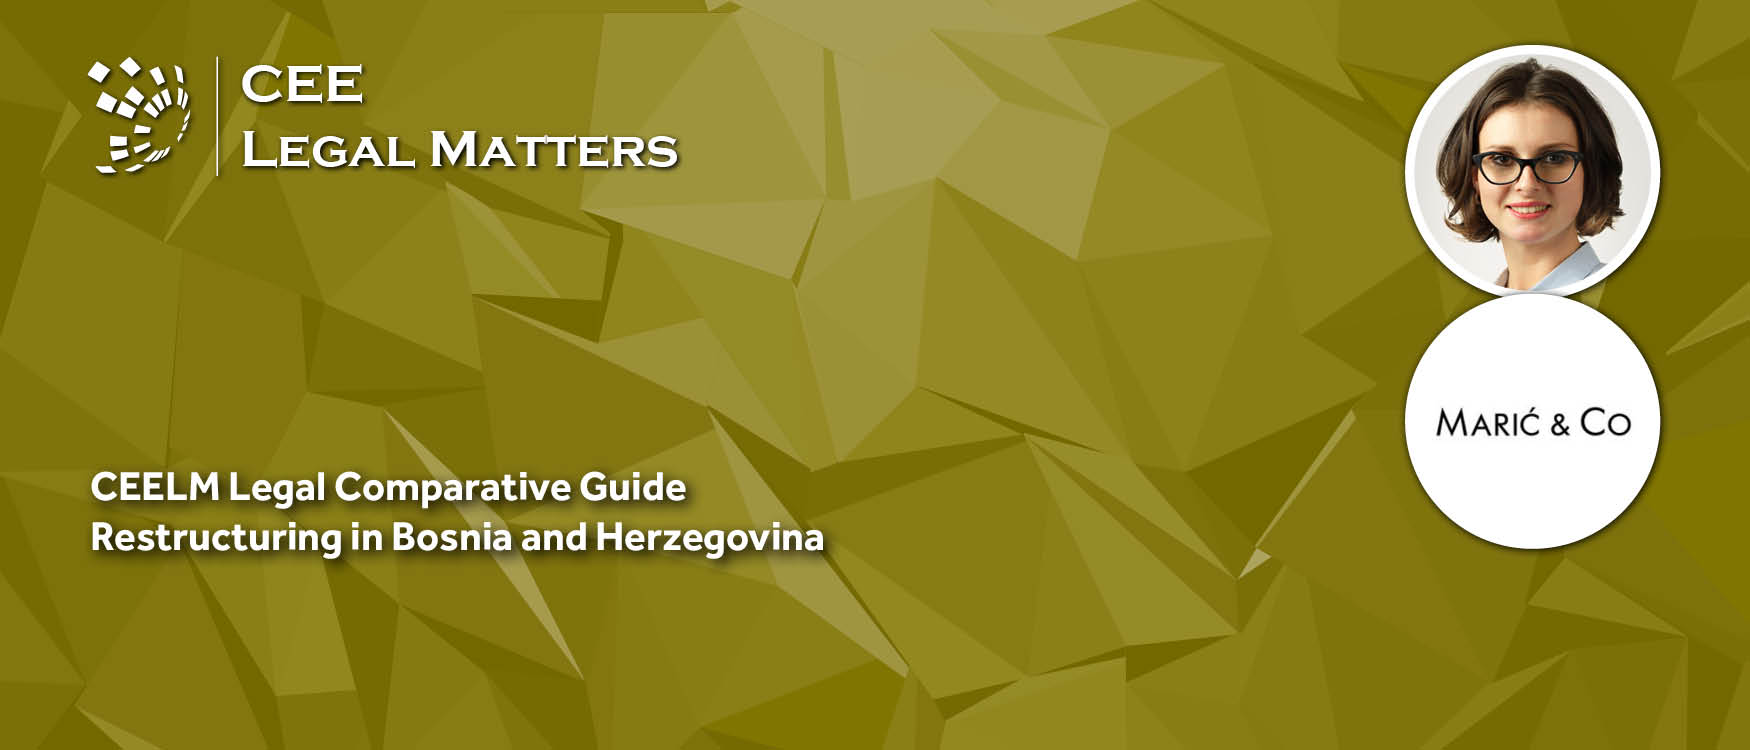 Restructuring Laws and Regulations in Bosnia and Herzegovina